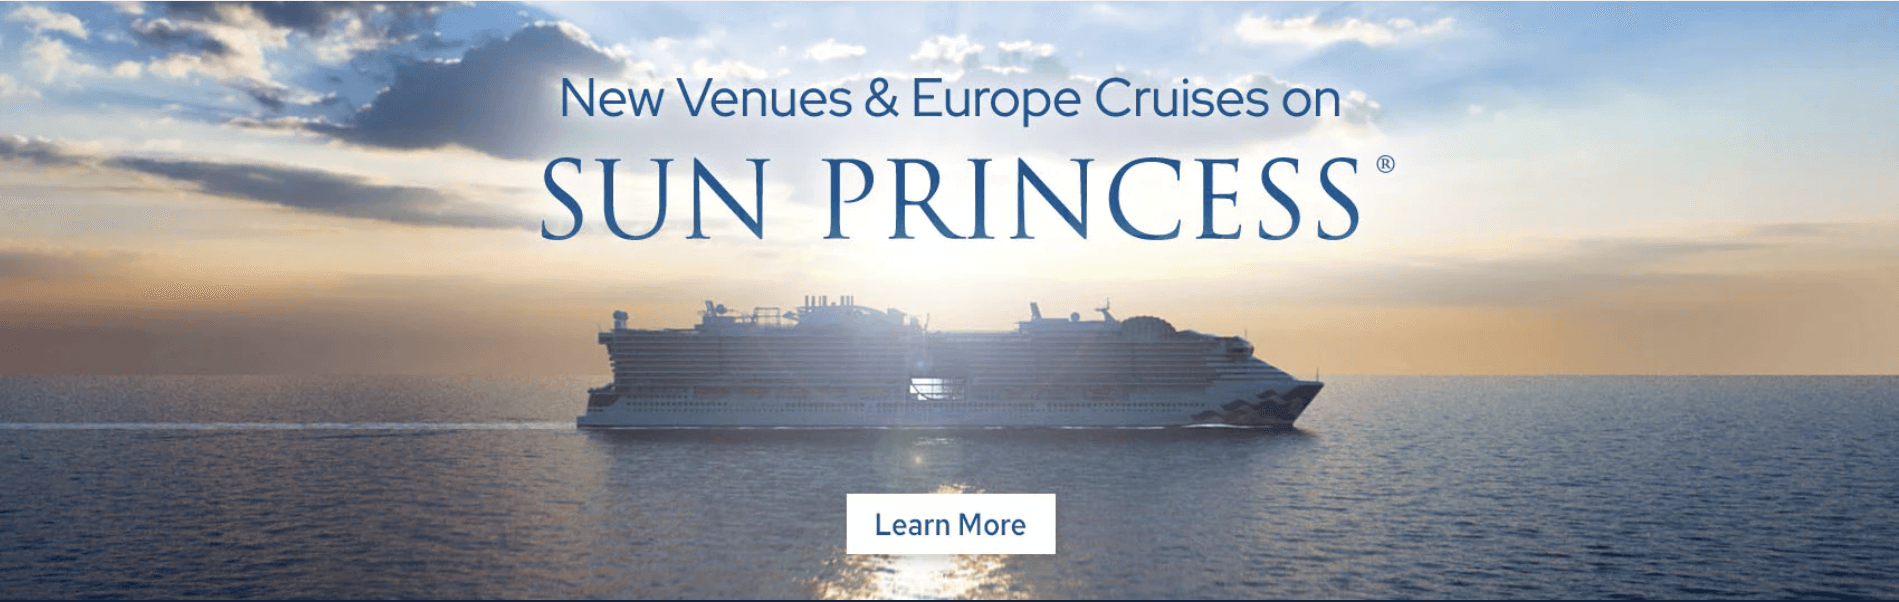 Where You Can Go with Princess Cruises